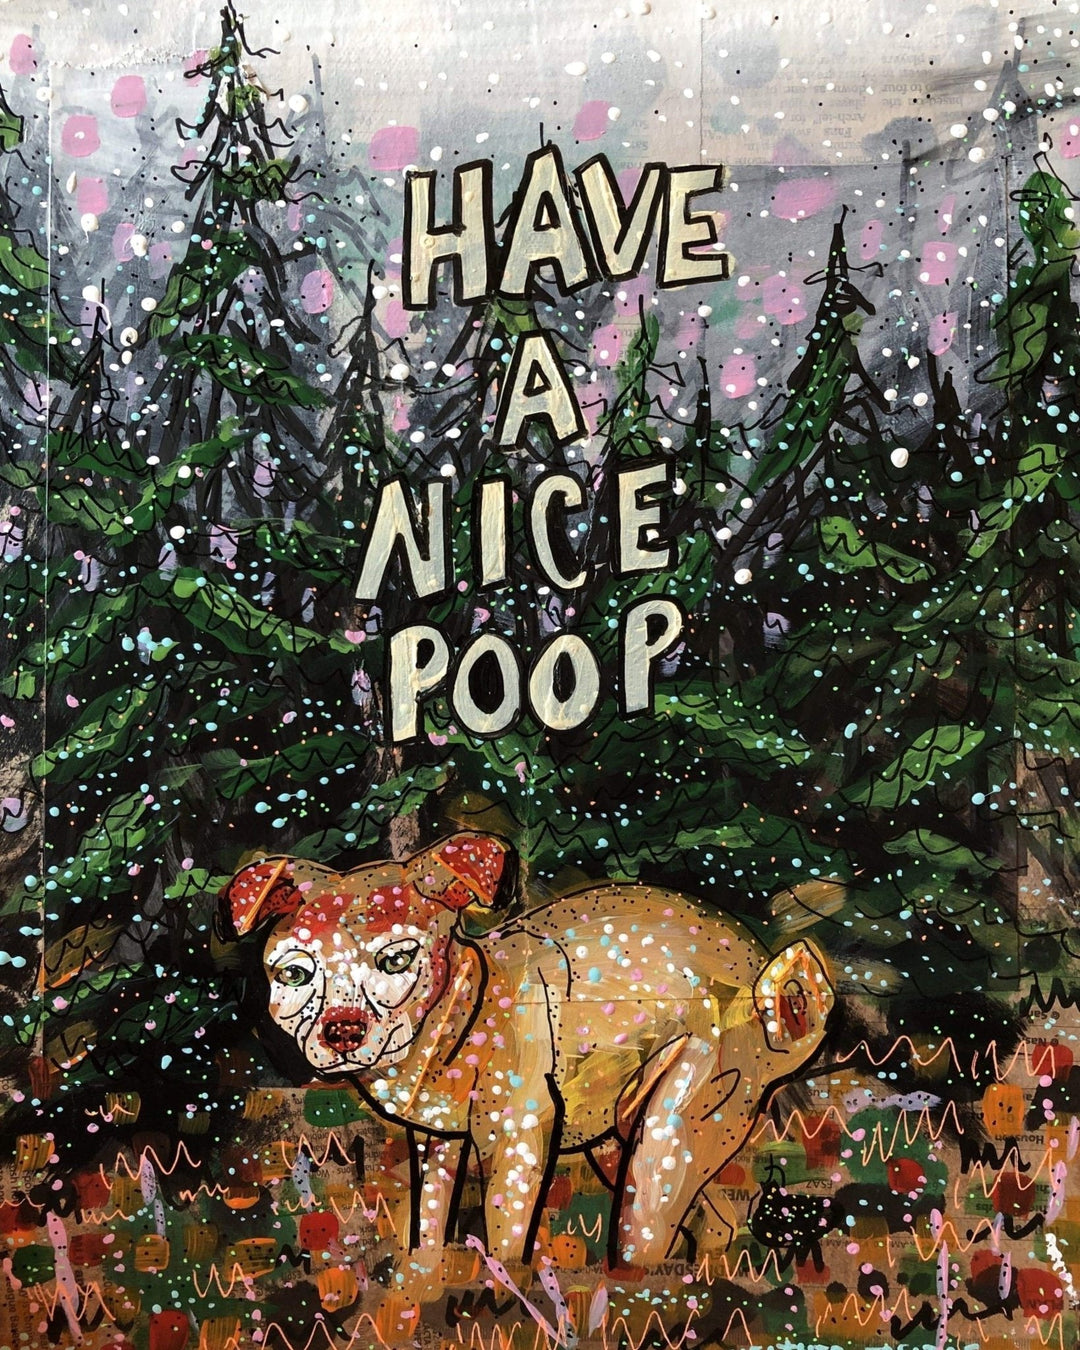 Have A Nice Poop - Archie Edition - Heather Freitas 